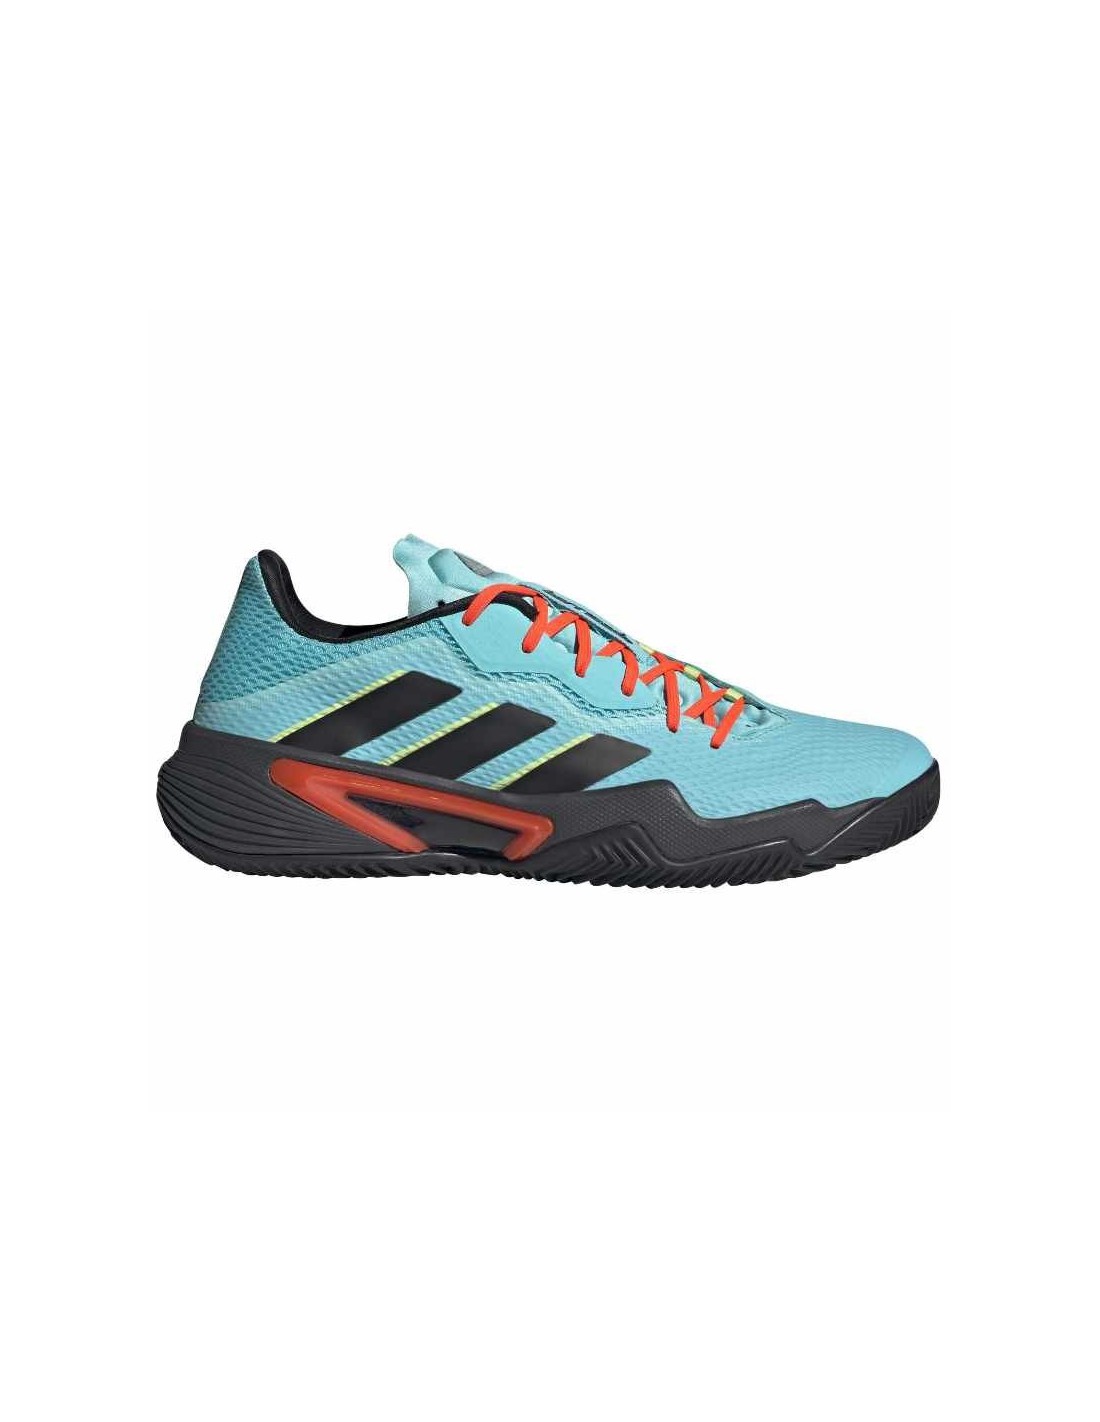 ADIDAS BARRICADE M CLAY AG-NG TENNIS SHOES | Onlytenis